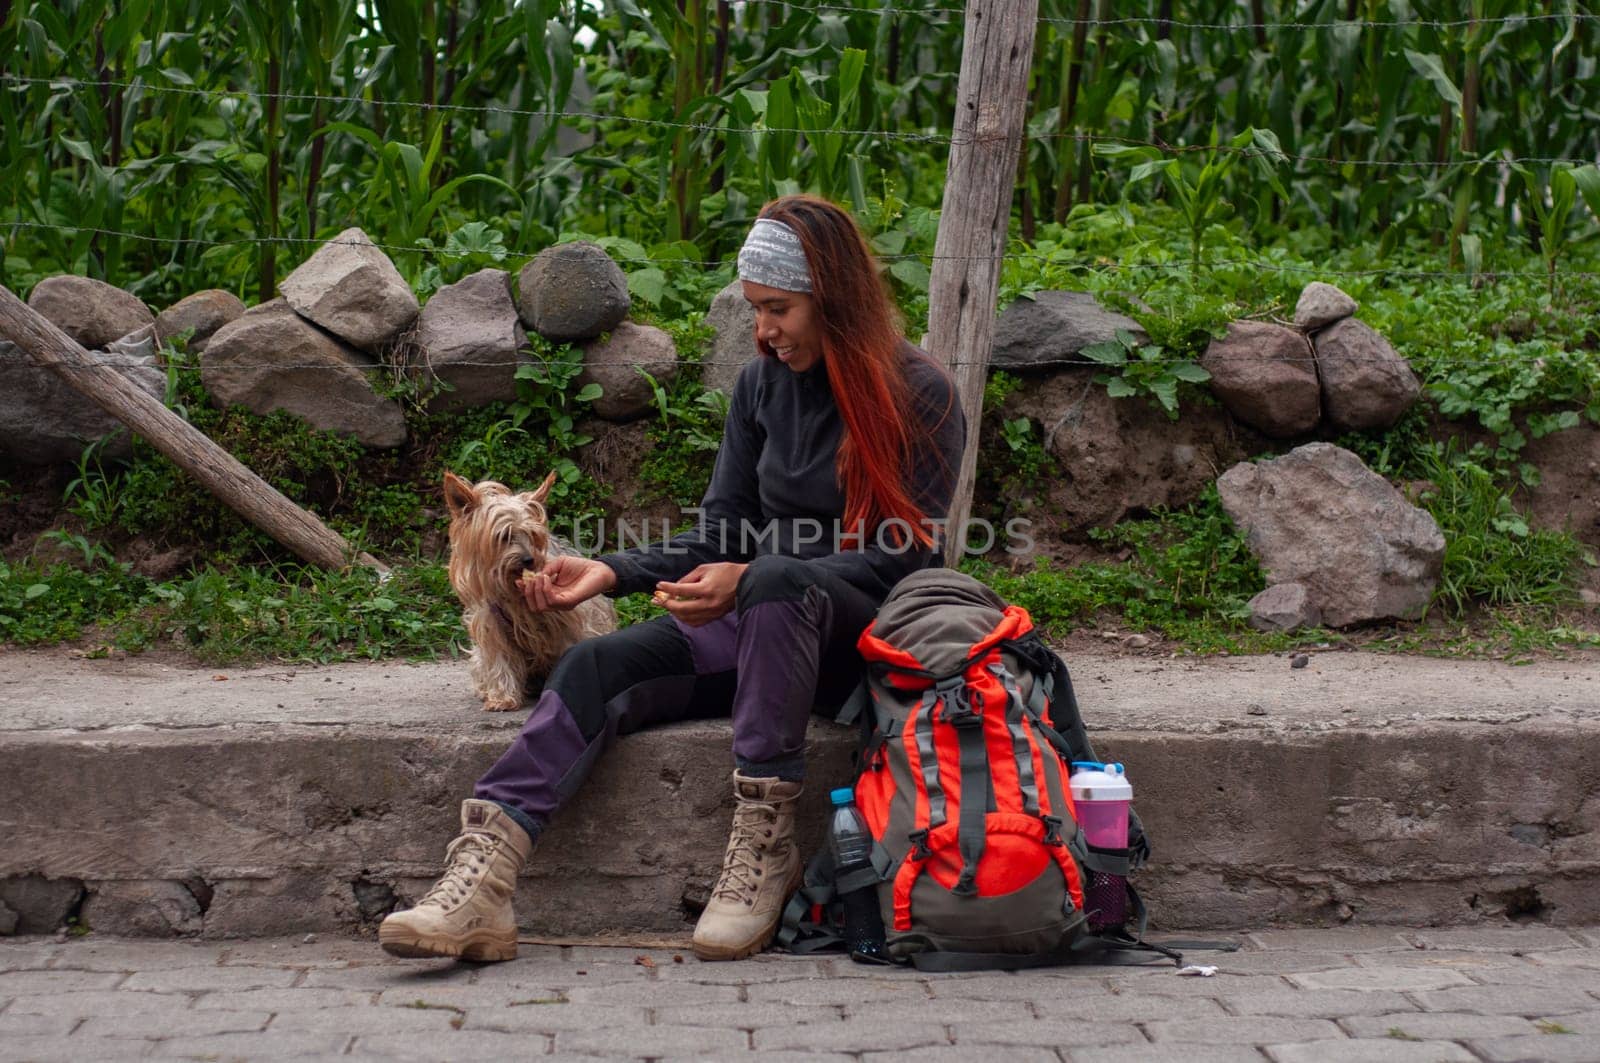 woman backpacker sitting on the sidewalk feeding her little dog some cookies and an orange backpack. by Raulmartin